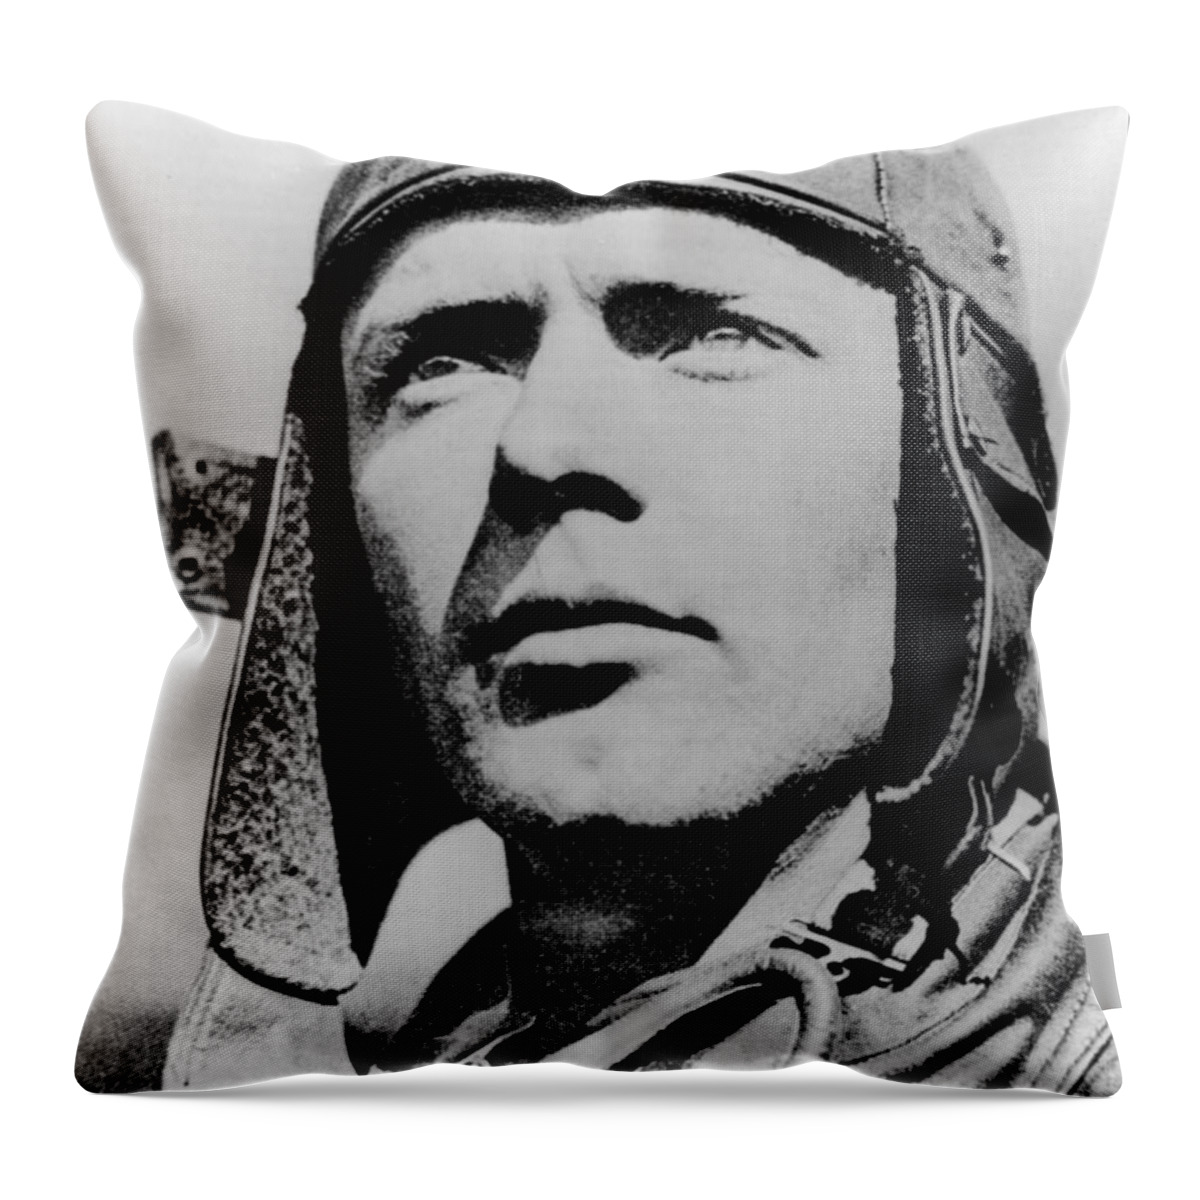 Aviation Throw Pillow featuring the photograph Charles Lindbergh, American Aviator by Science Source